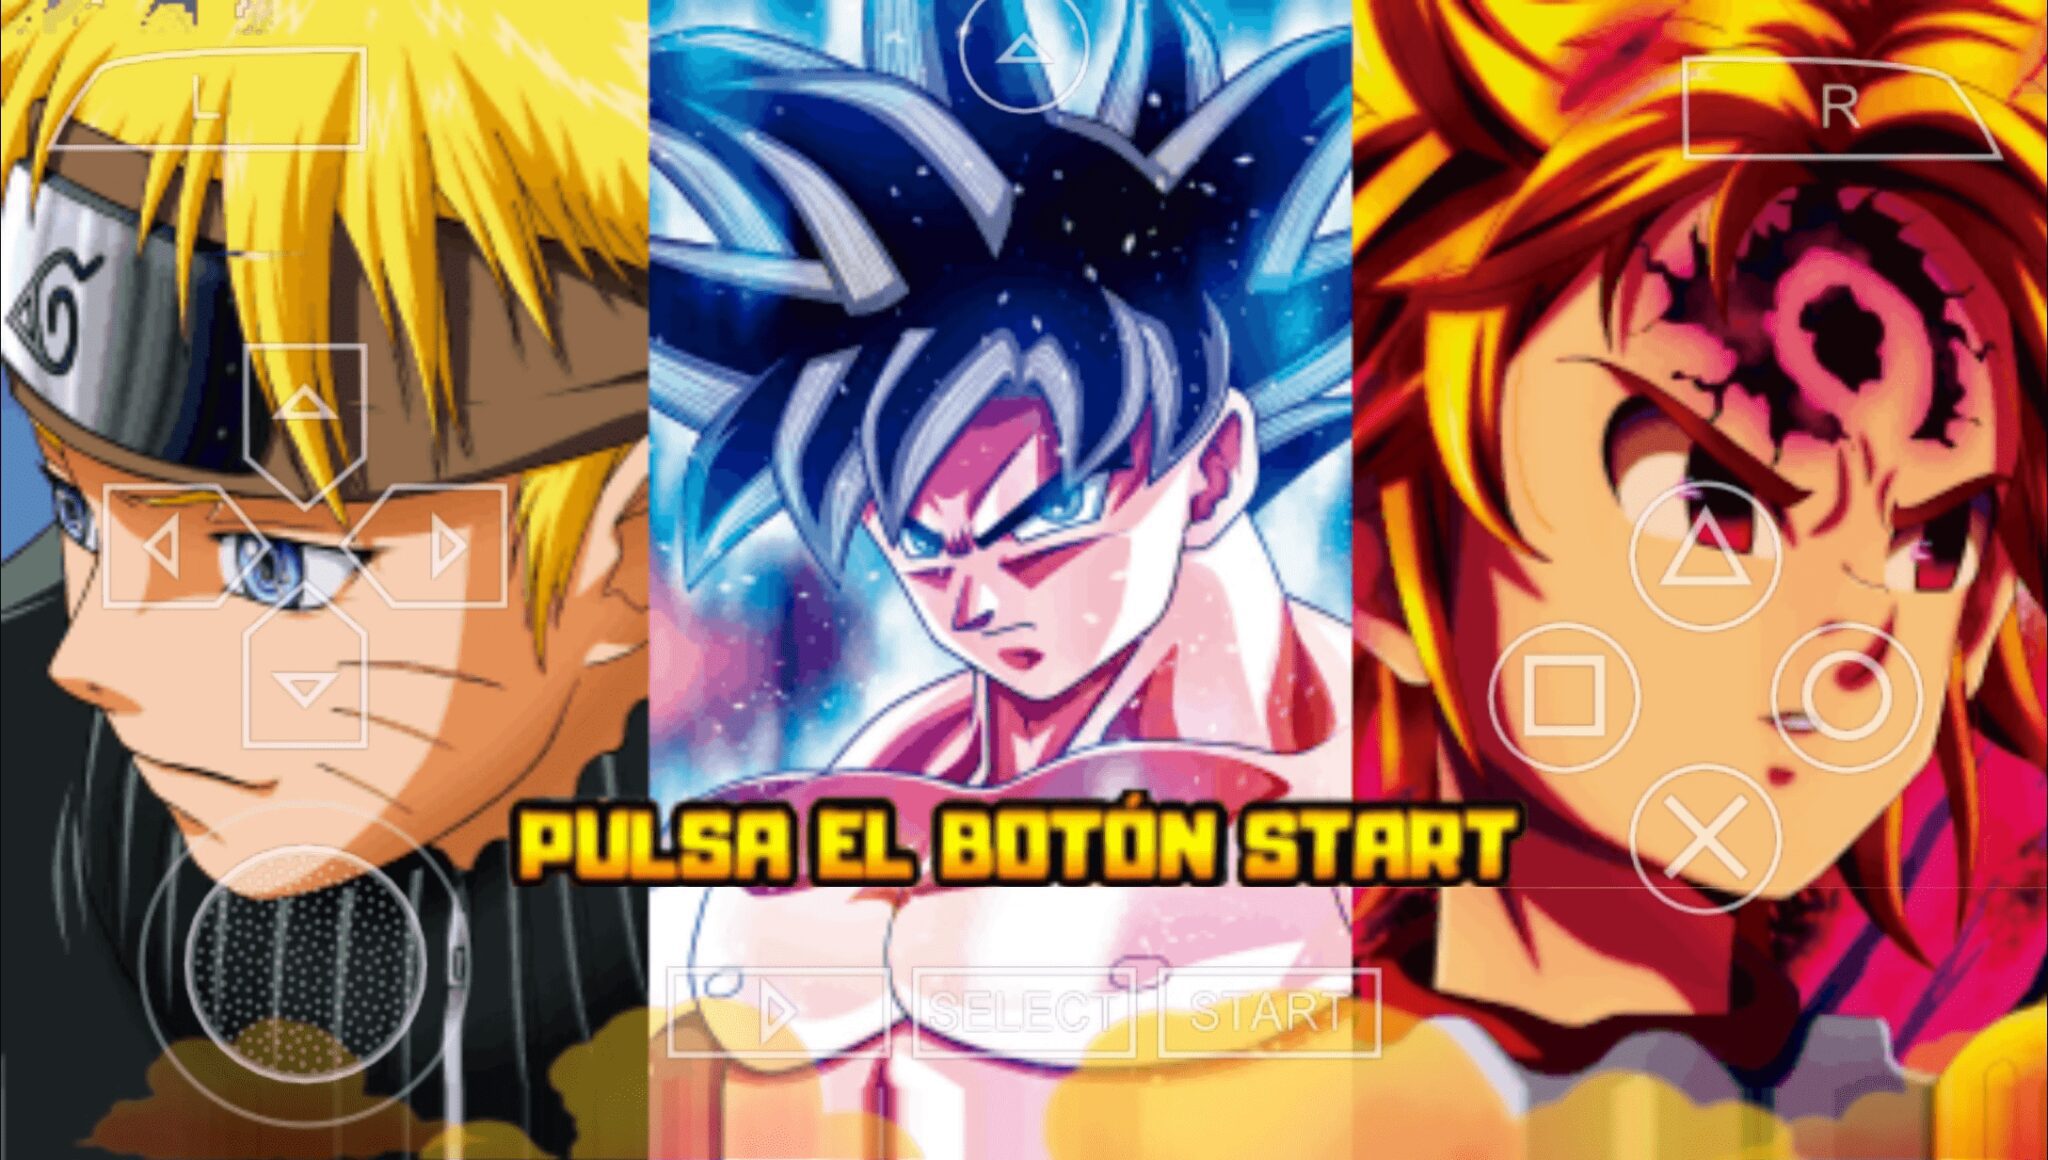 dragon ball z psp games for android